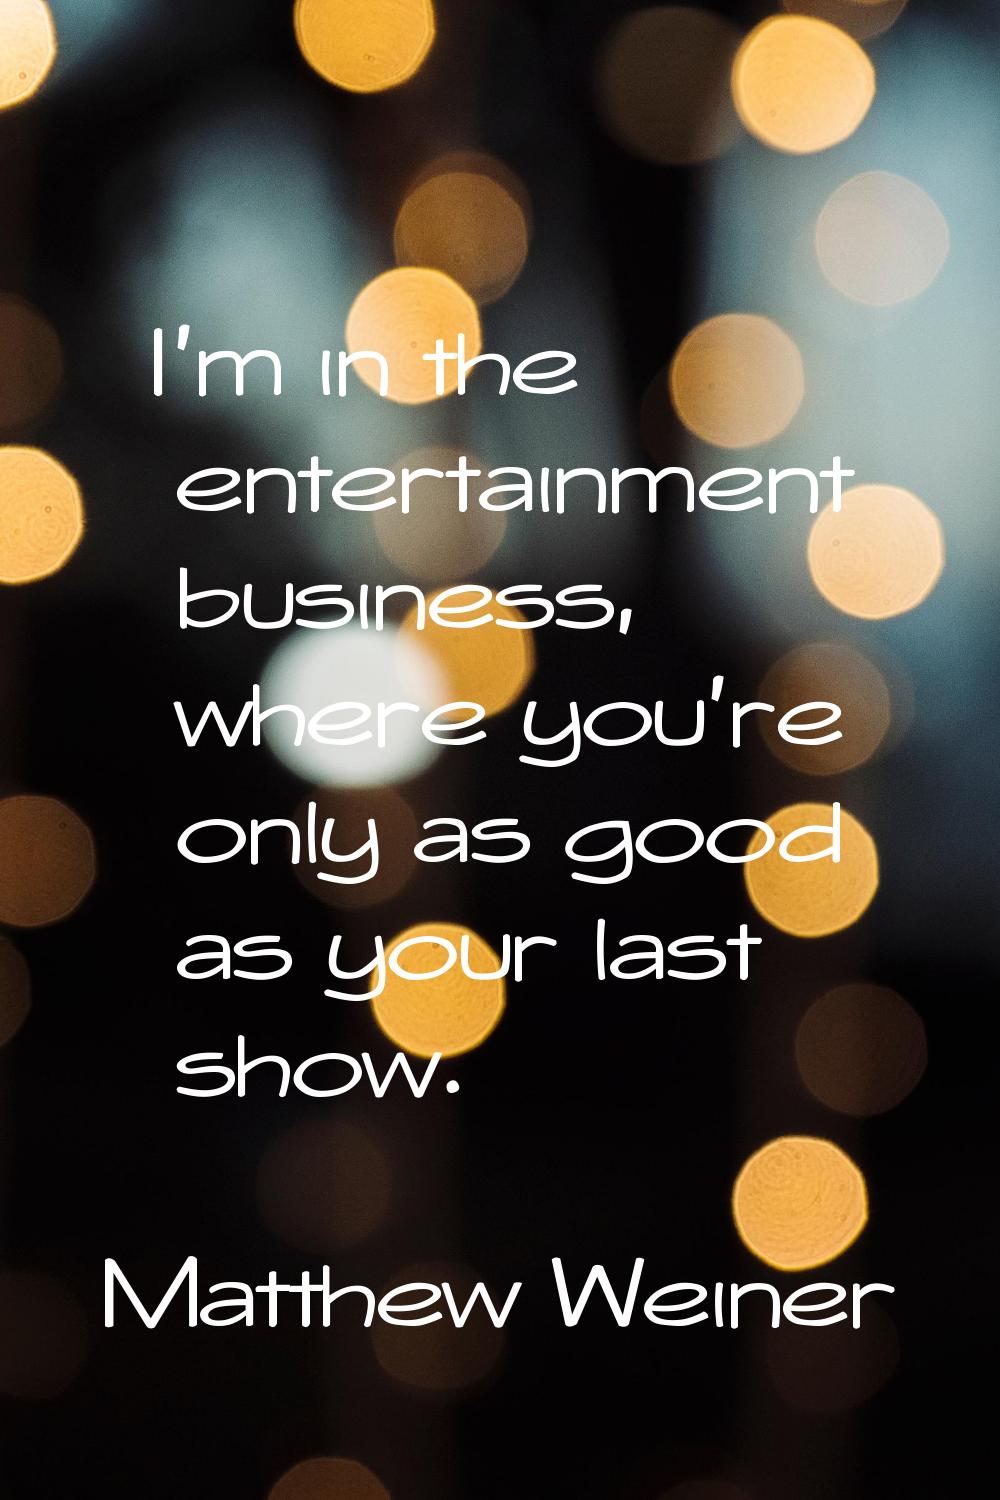 I'm in the entertainment business, where you're only as good as your last show.